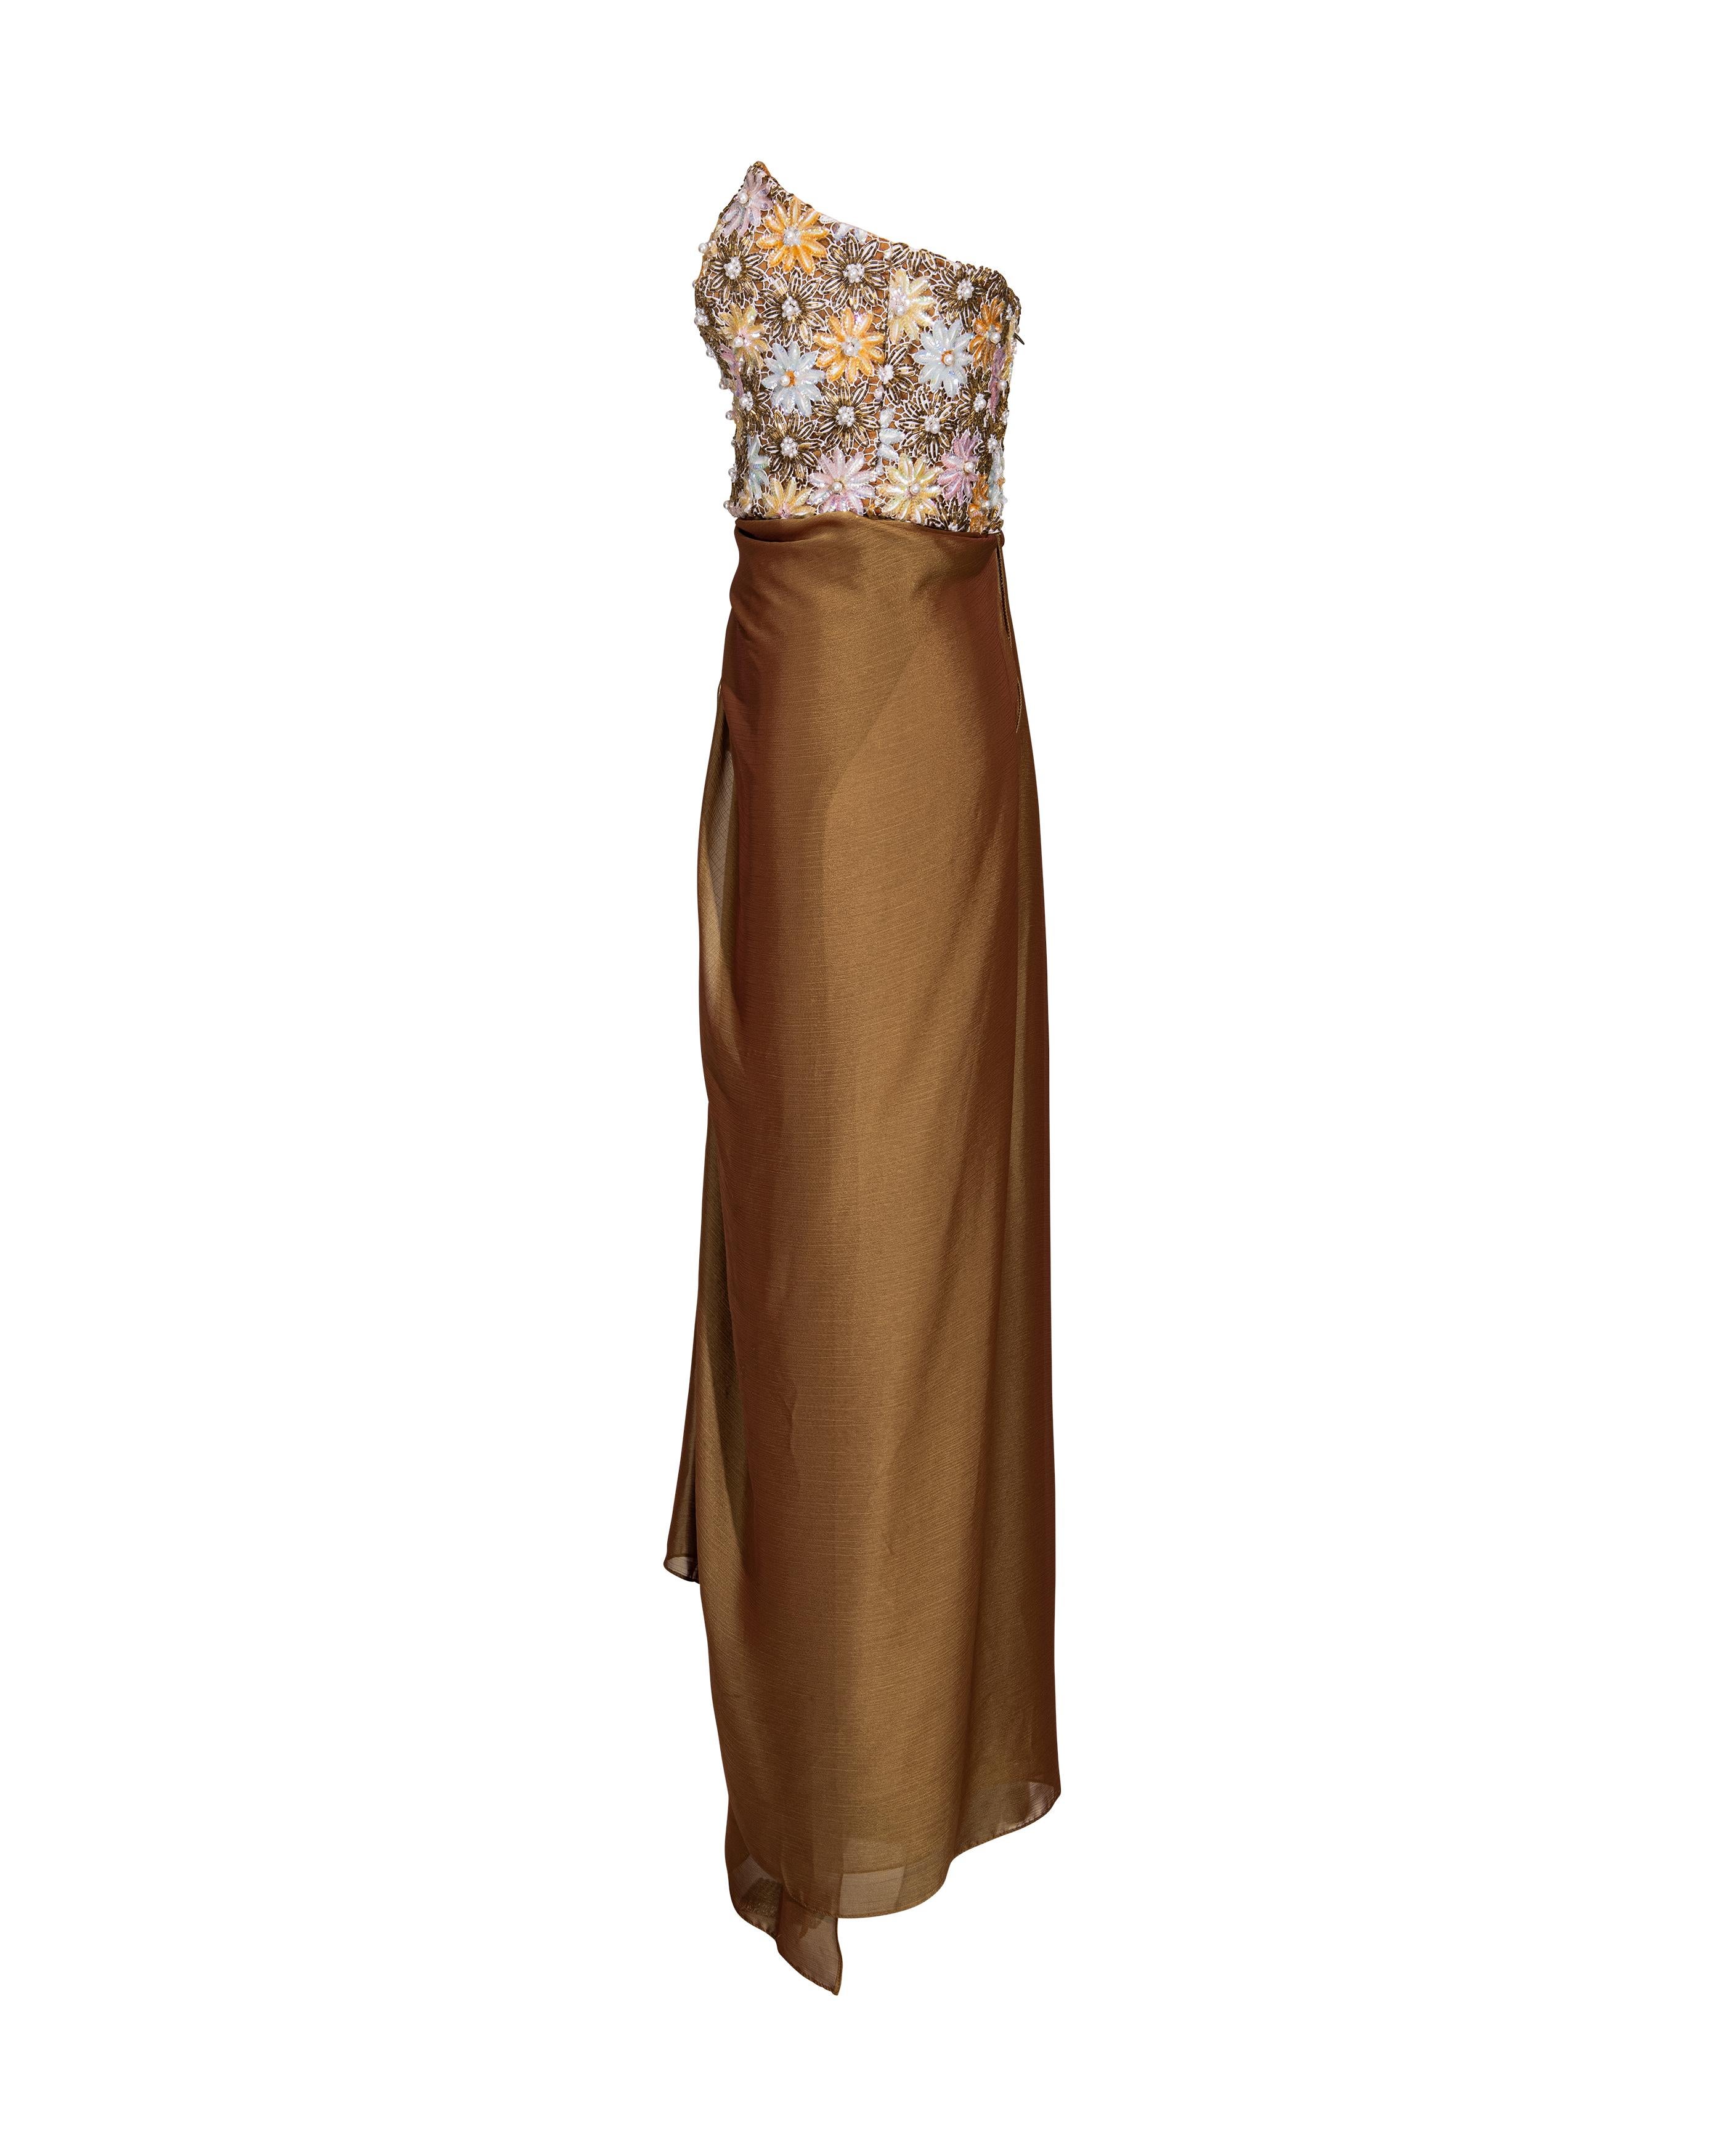 c. 1991 Nina Ricci Embellished Copper Strapless Gown with Stole For Sale 2